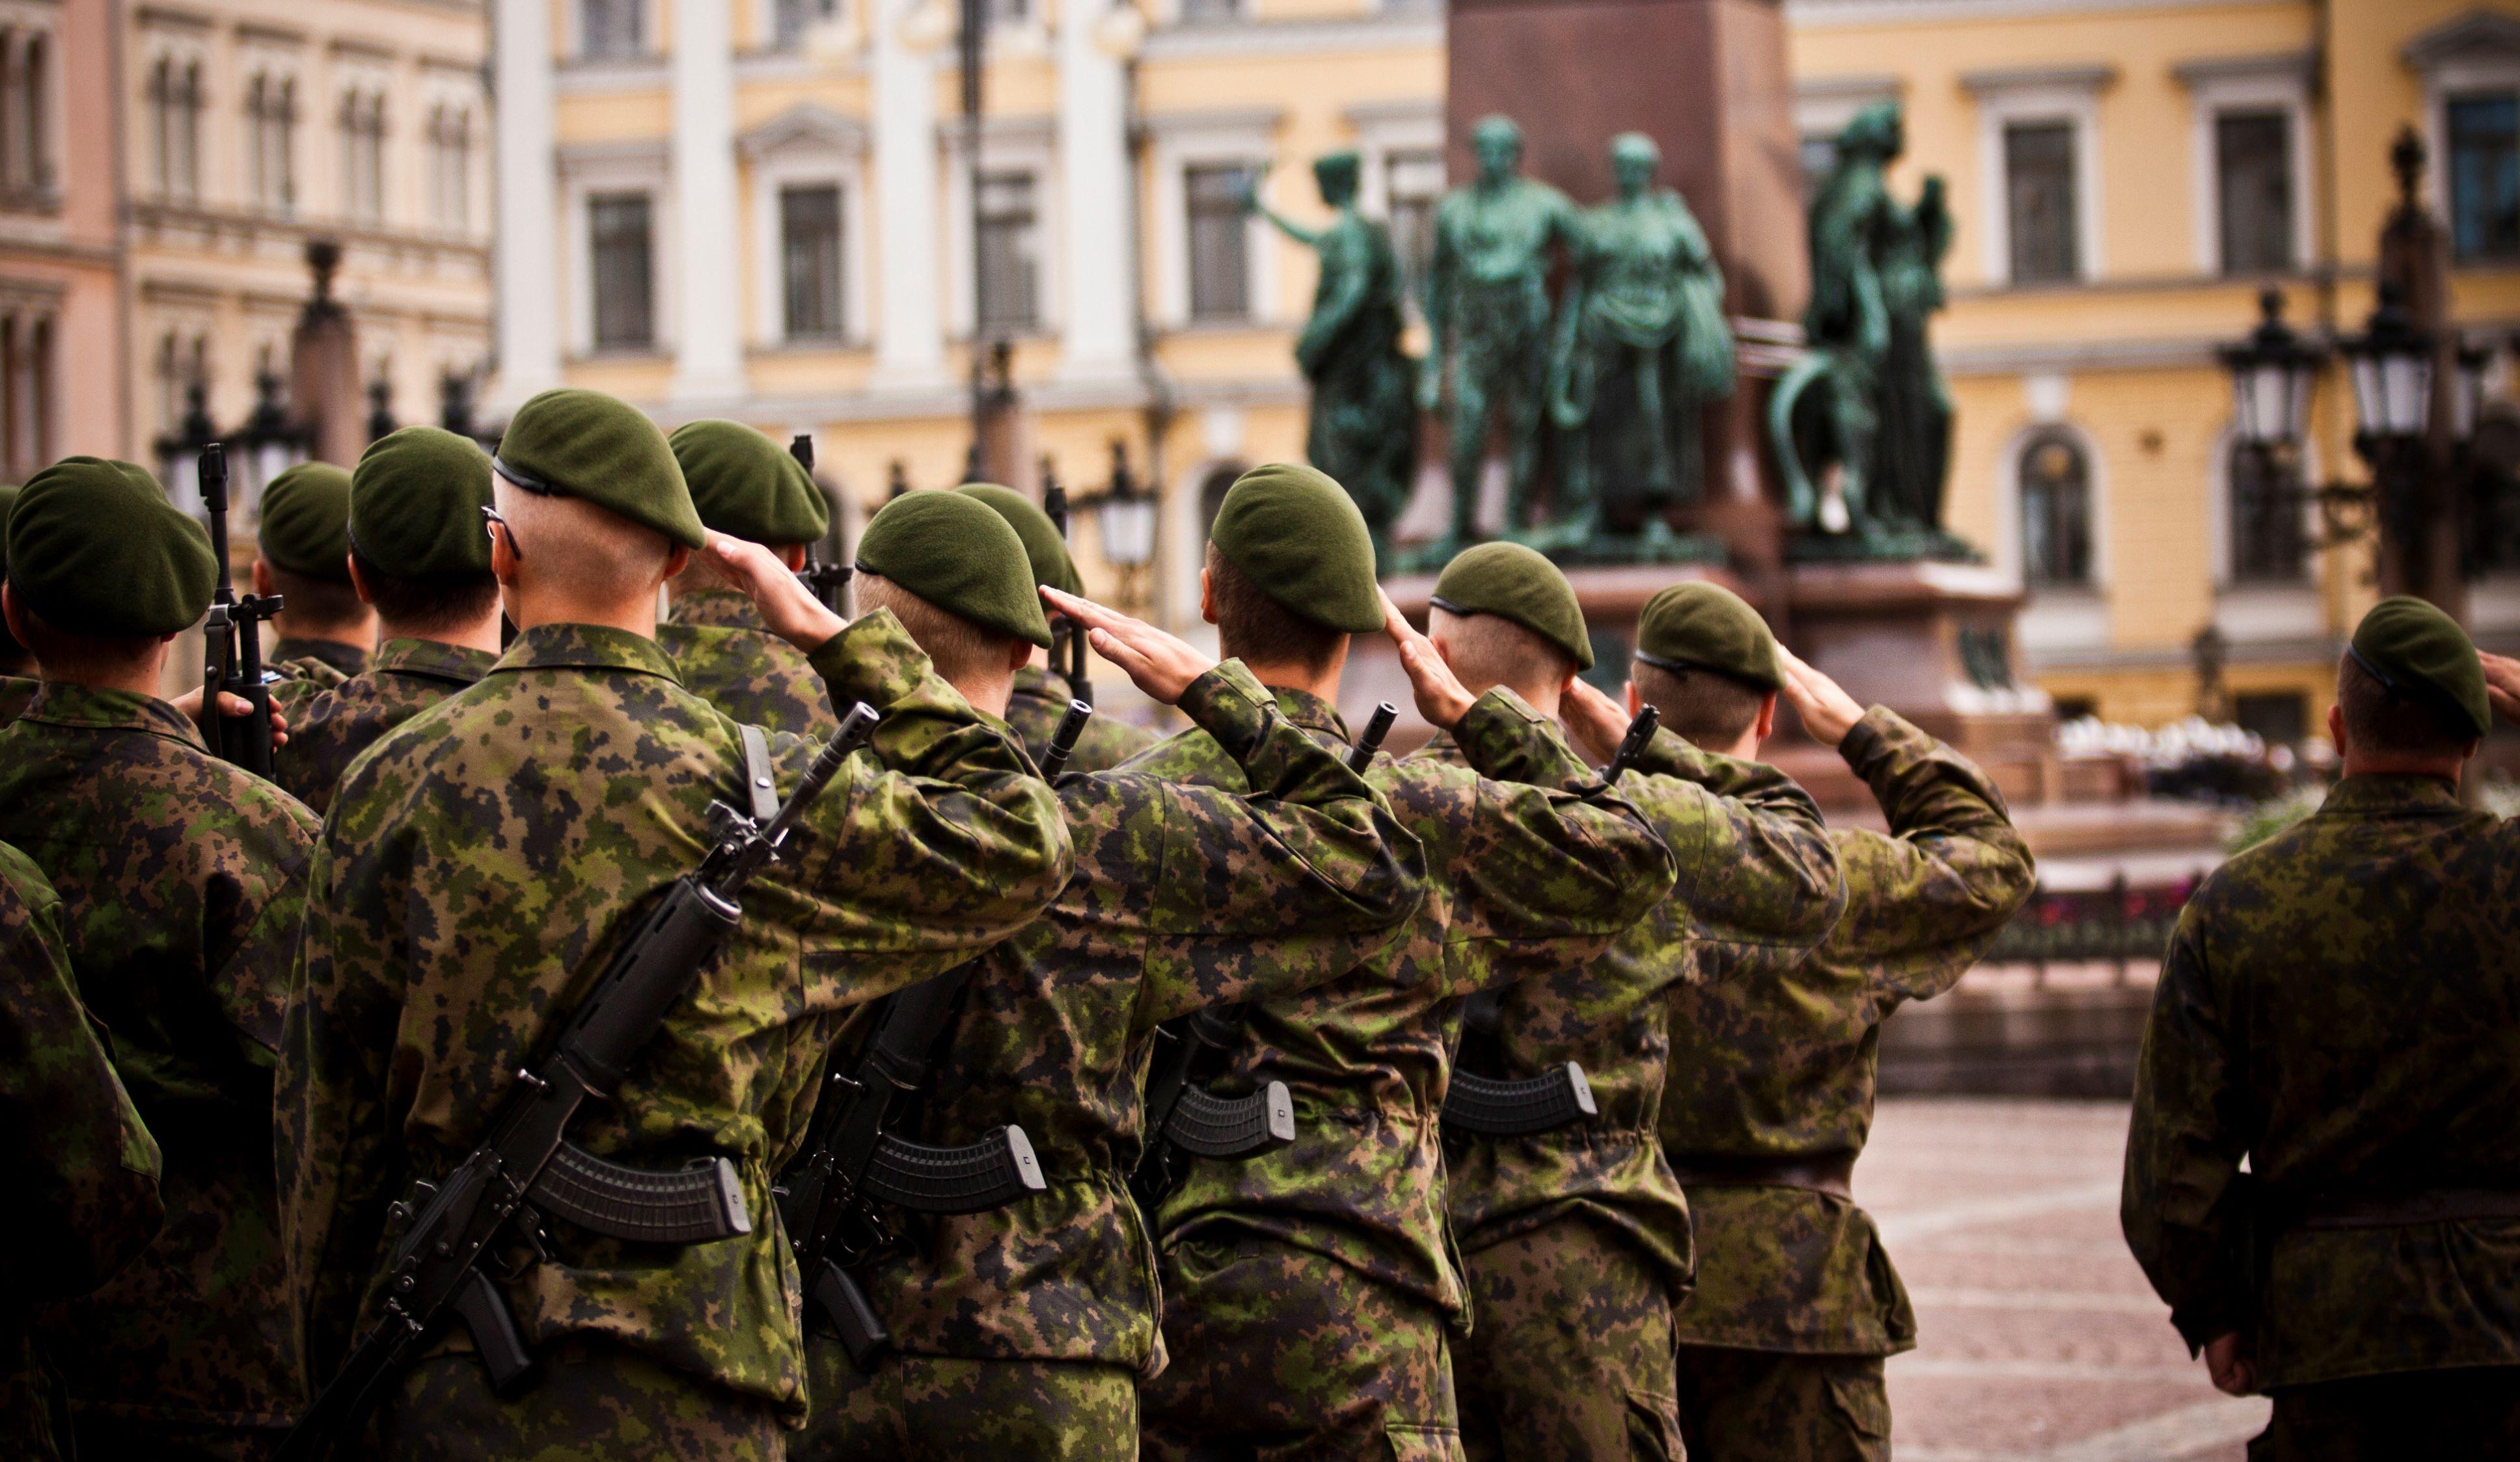 Conscripts giving their military oath and affirmation at the Helsinki Senate Square.